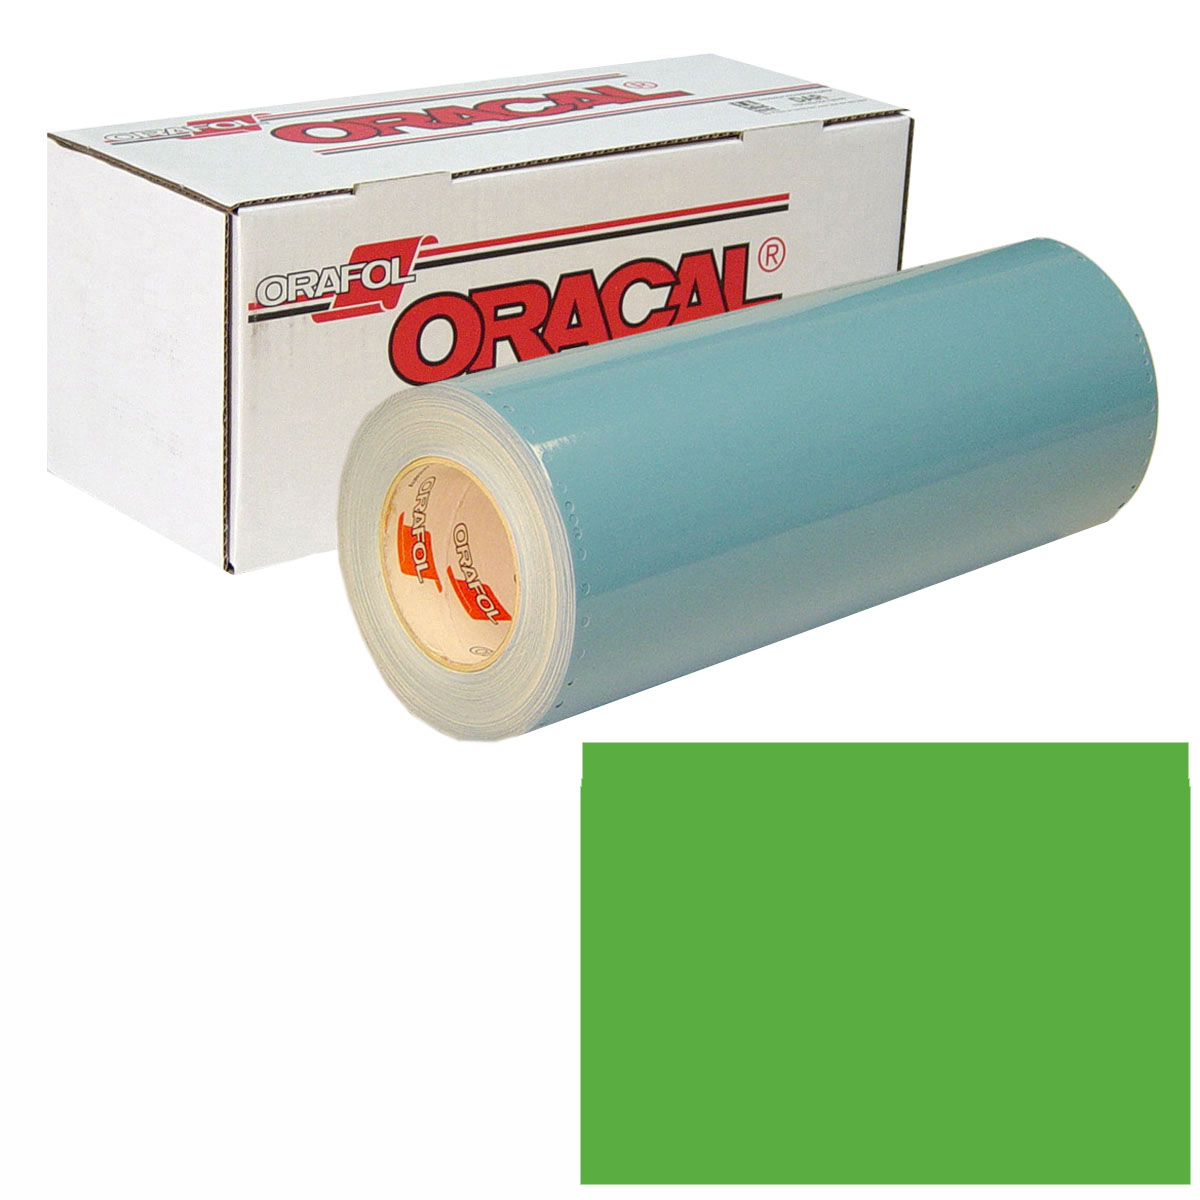 ORACAL 751 Unp 48in X 50yd 063 Lime-Tree Gree